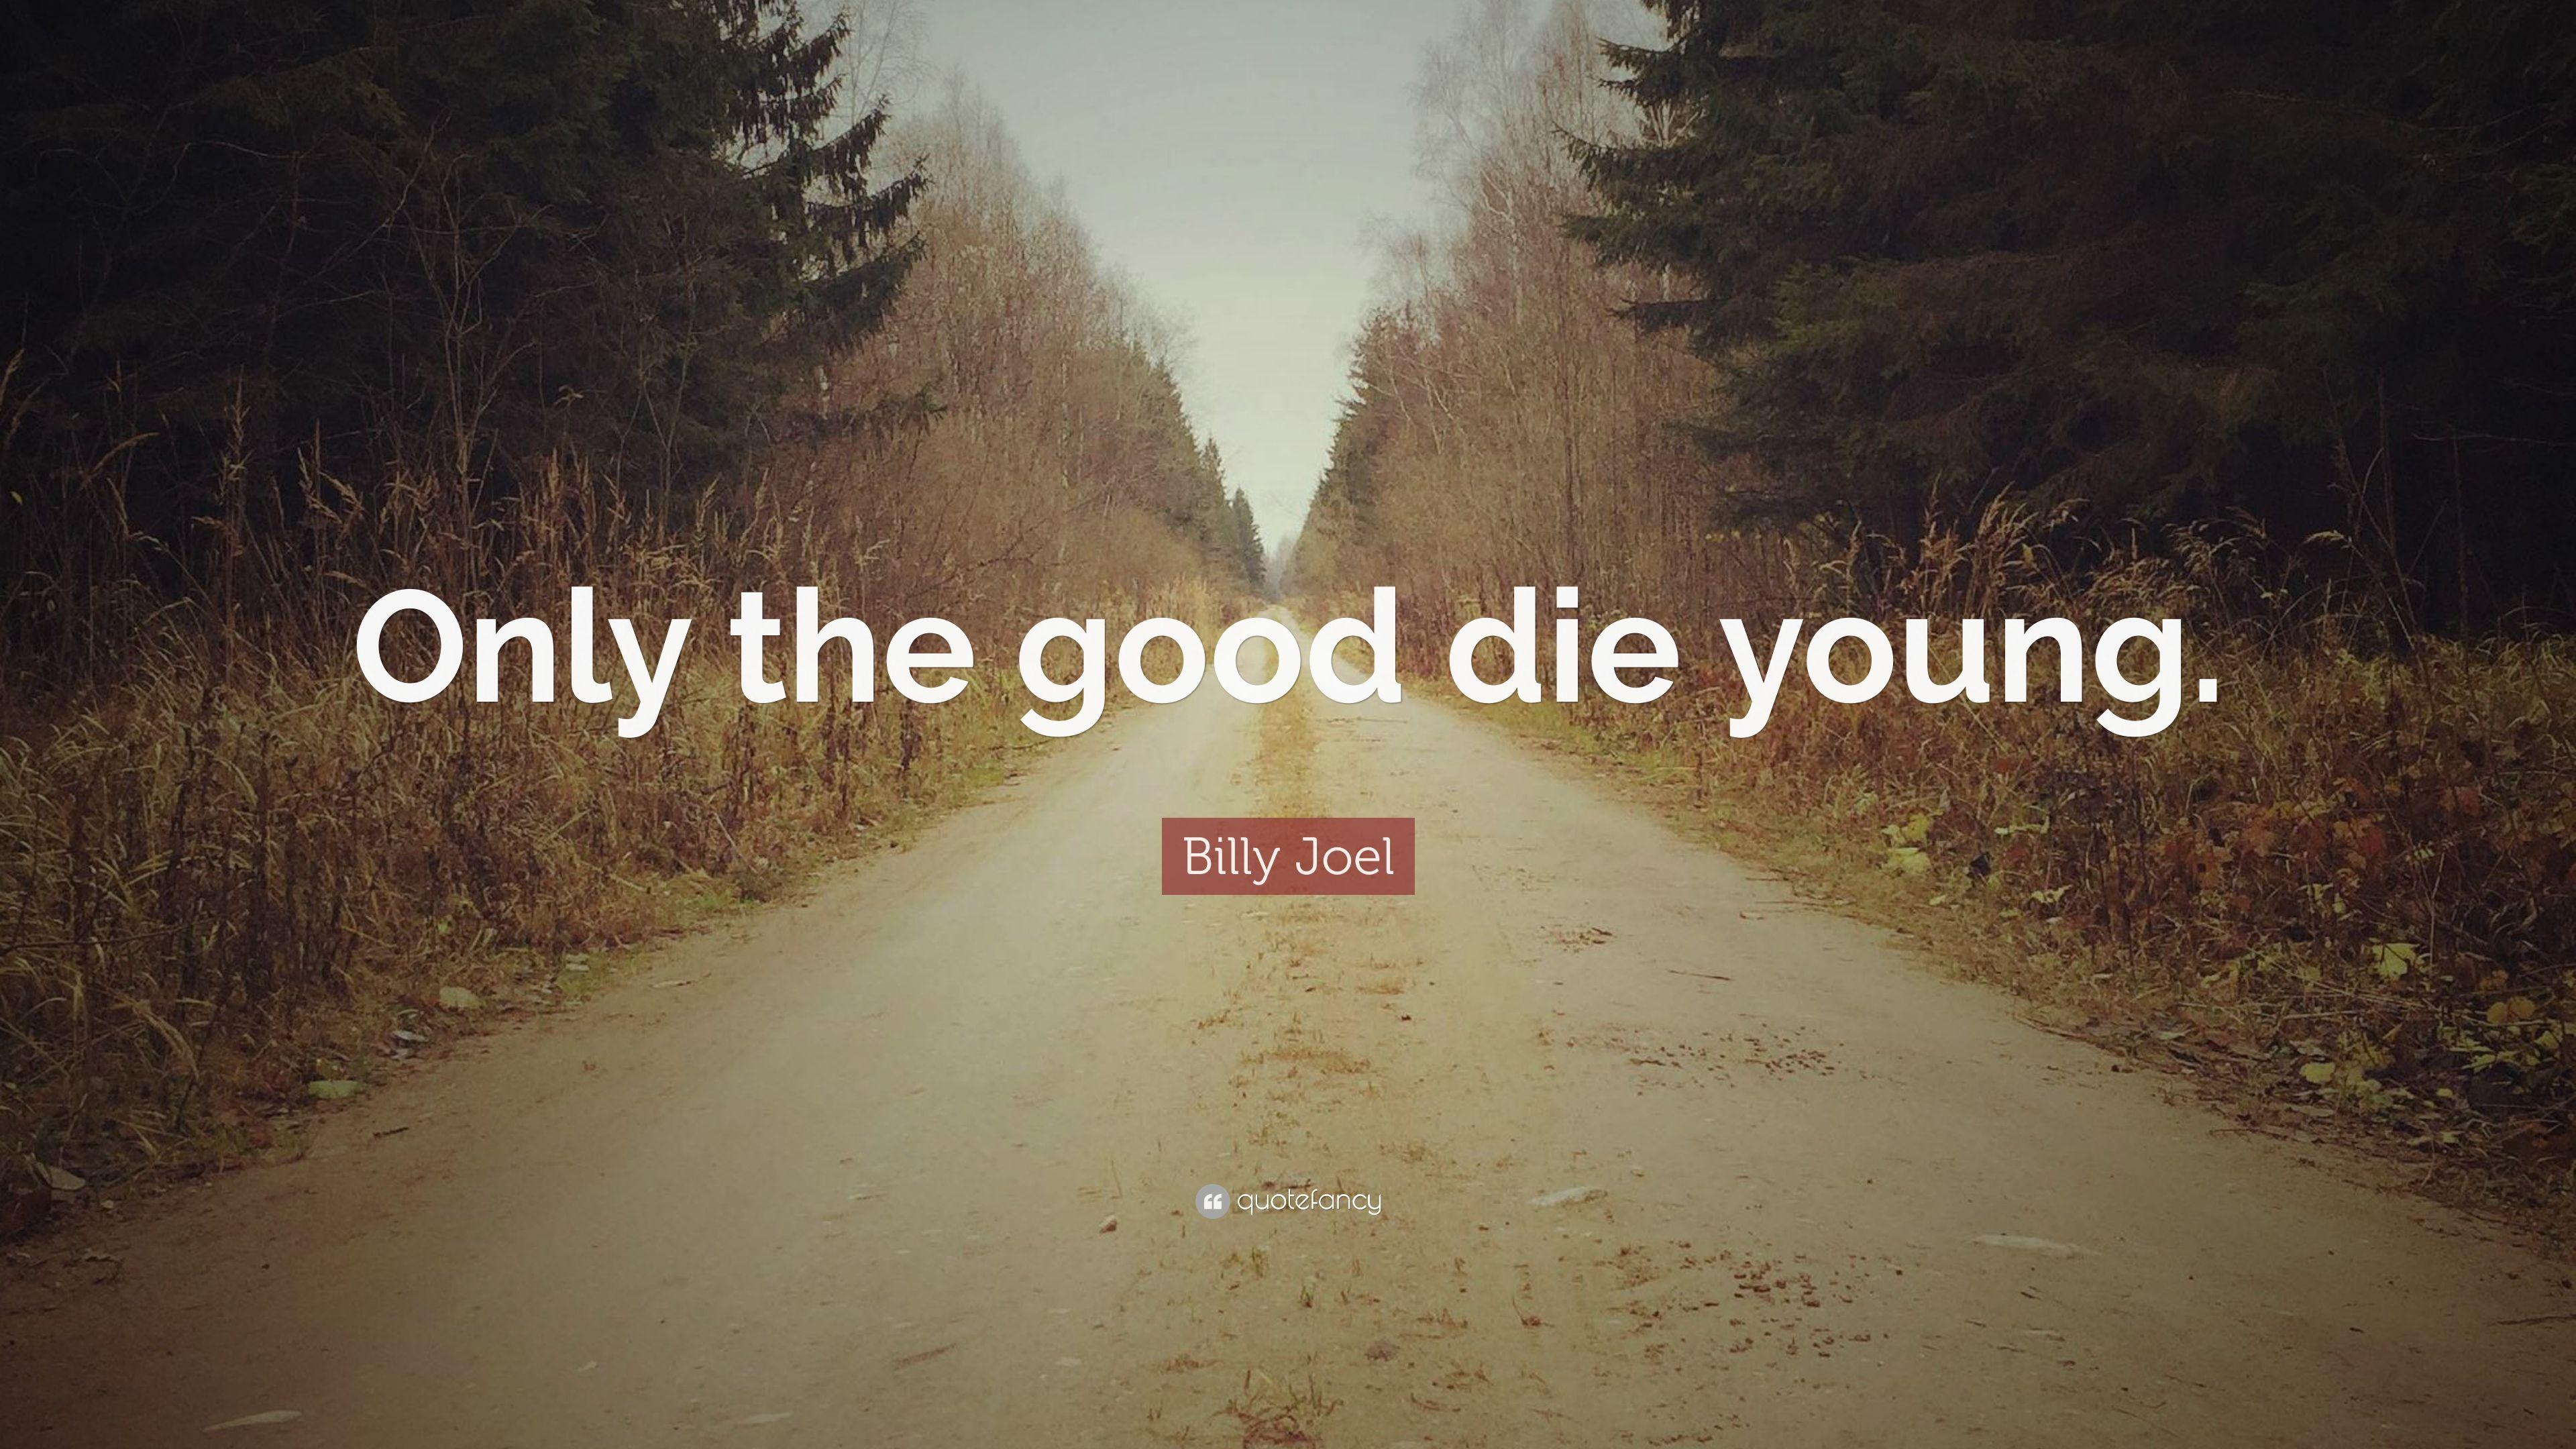 Billy Joel Quote: “Only the good die young.” 12 wallpaper